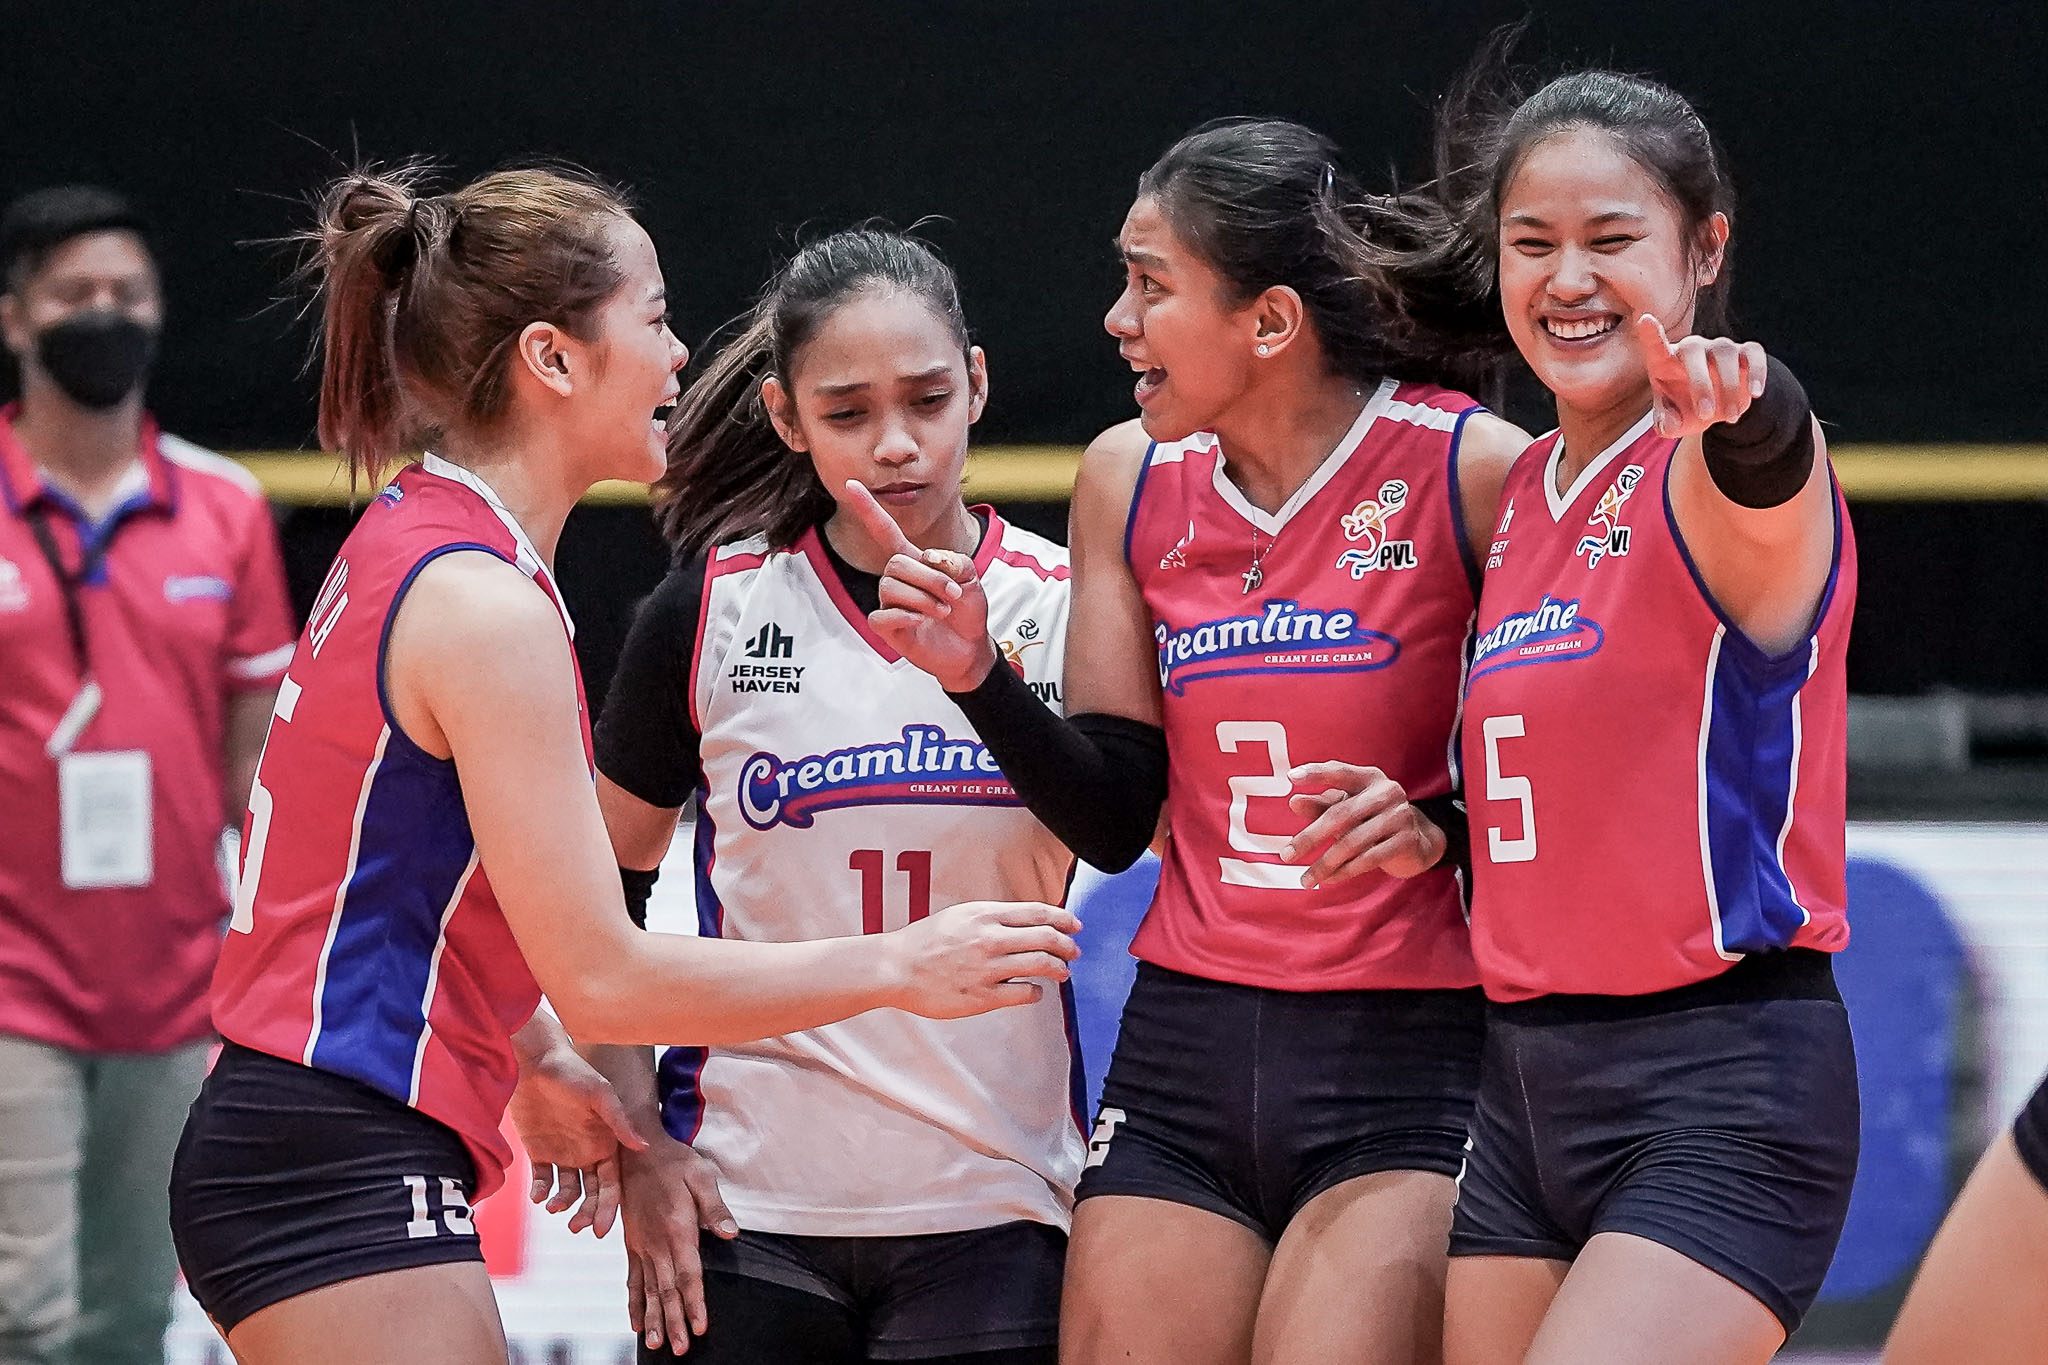 Risa Sato boosts PH Grand Prix team as recovering Alyssa Valdez sits out anew